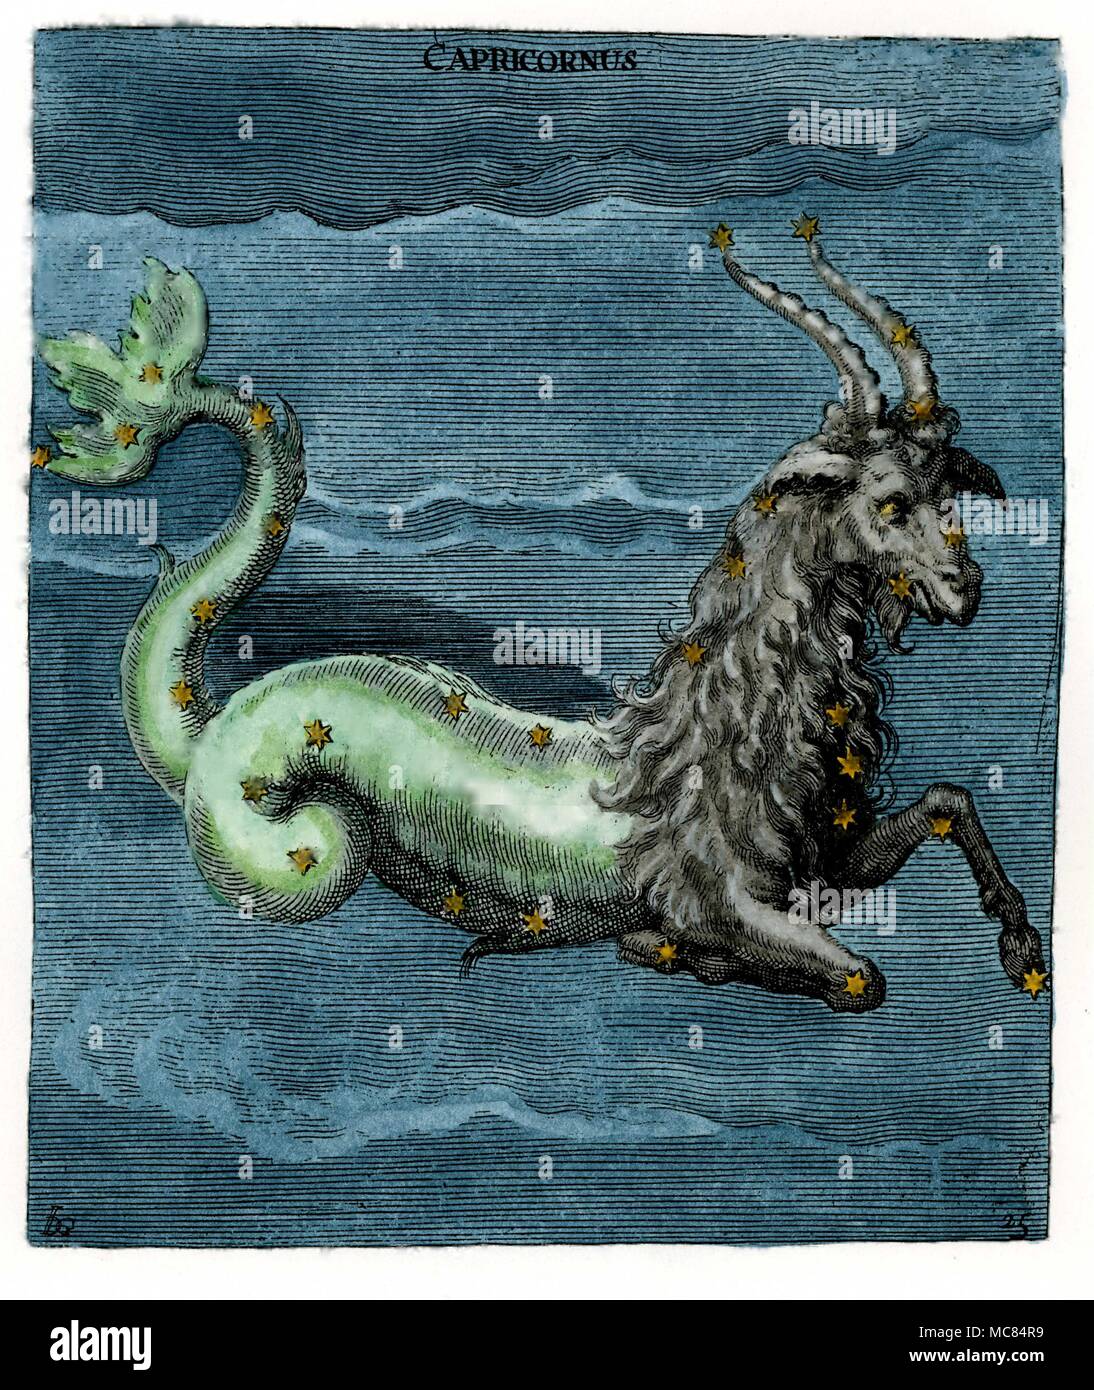 Capricornus, the goat-fish, from a seventeenth century hand-coloured engraving, itself based on an illumination in the 9th centry Aratus manuscript in Leiden. Aratus was born about 315 BC in Sosli, and wrote his 'Phaenomena' for the ruler of Macedonia. Stock Photo